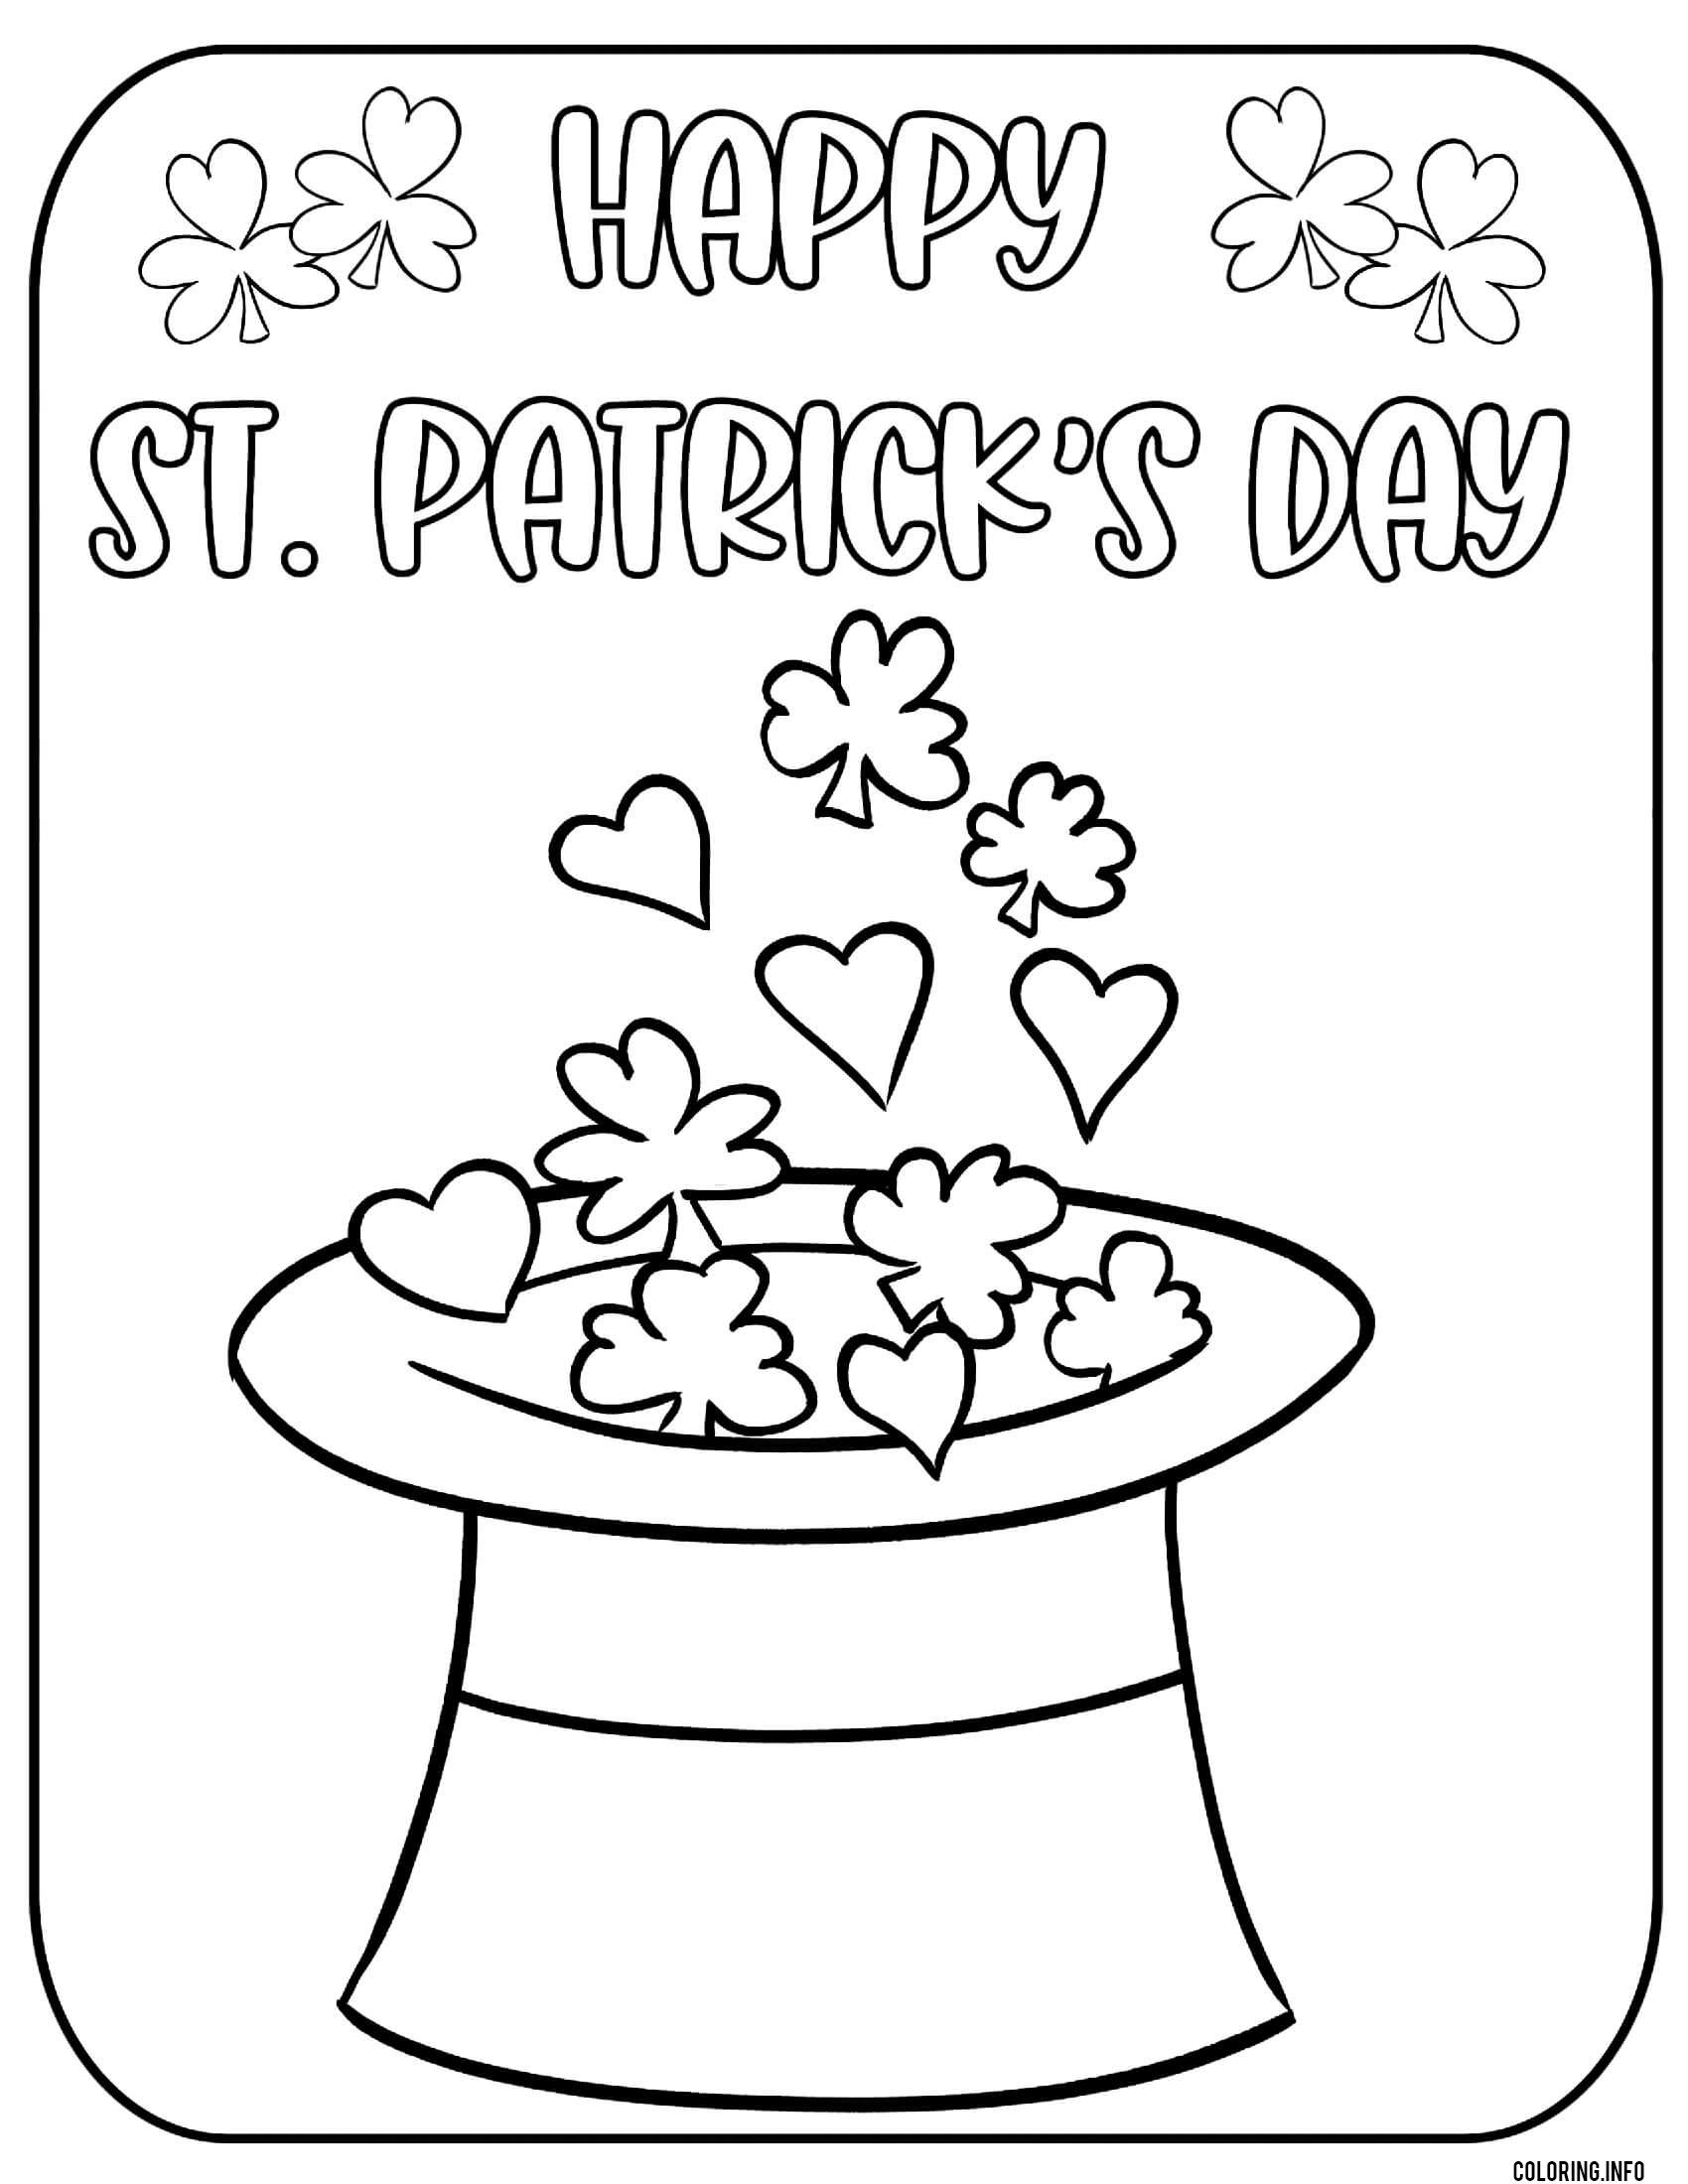 Saint Patrick In Irland Celebrated During Five Days coloring